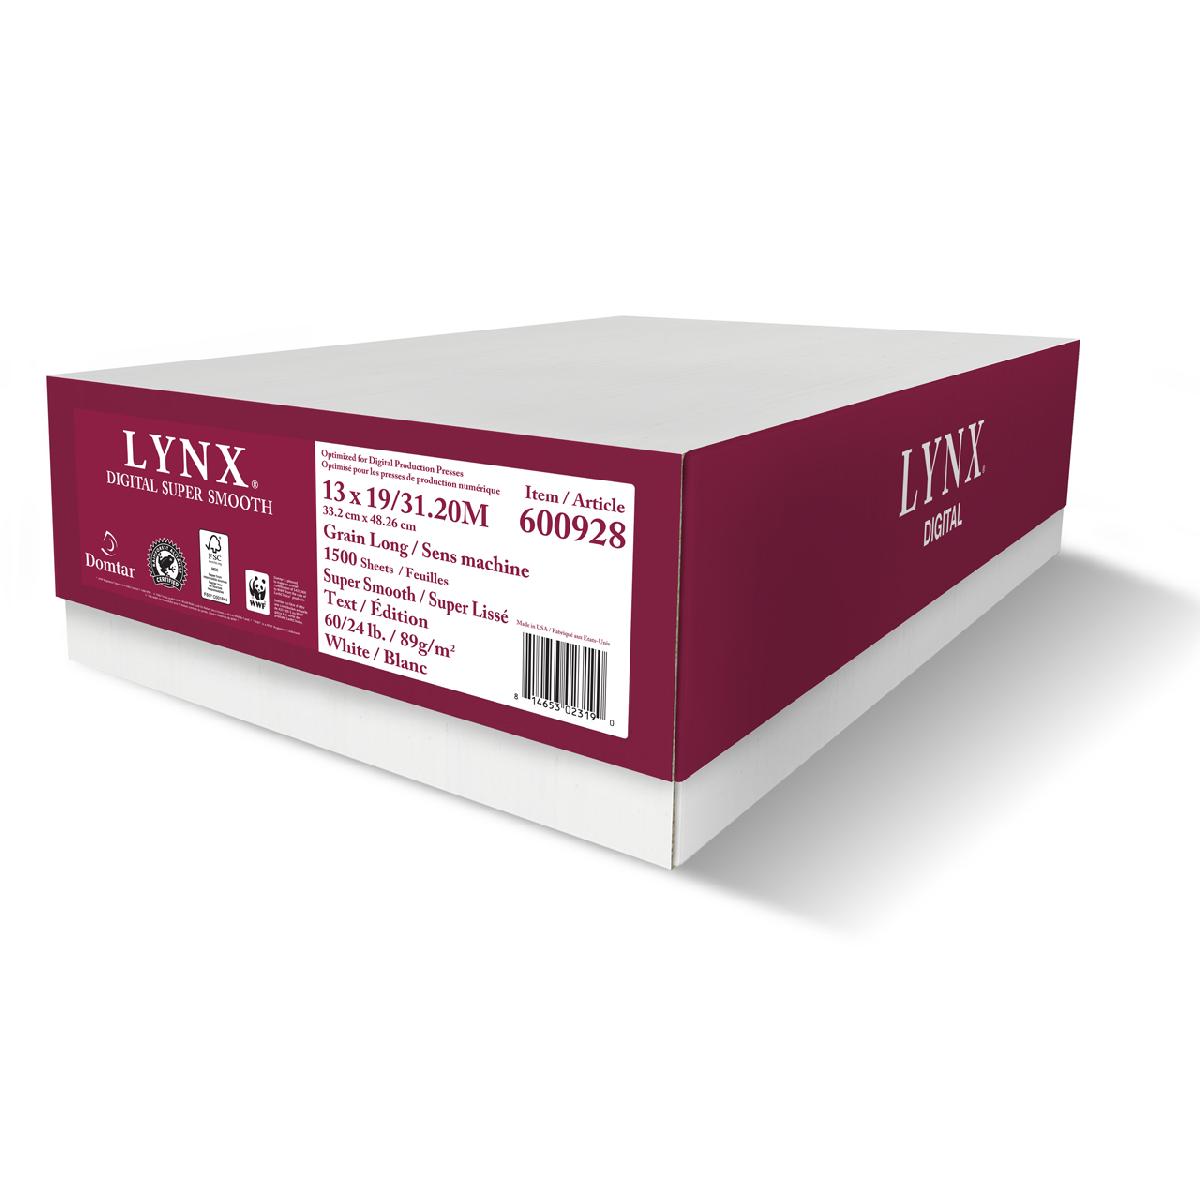 Domtar® Lynx™ Digital White Smooth 120 lb. Cover 19x13 in. 375 Sheets per Carton